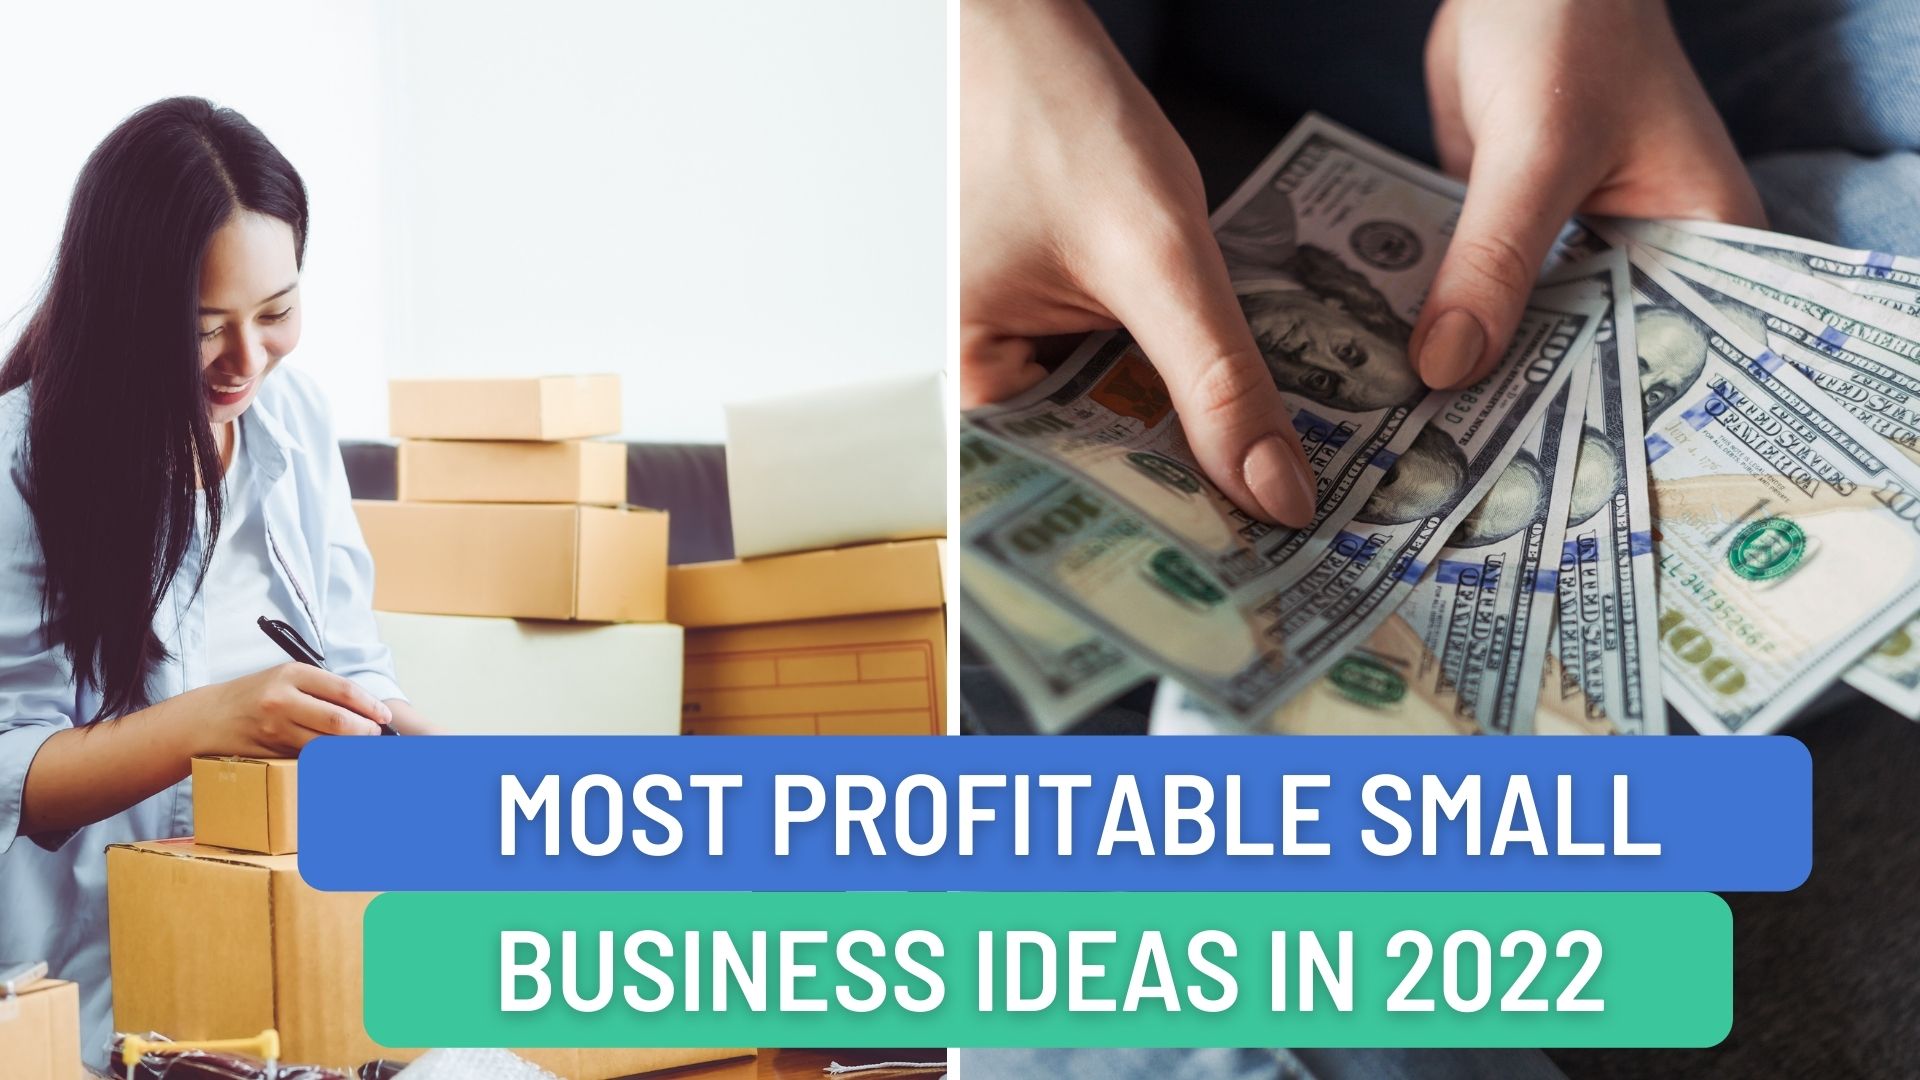 Most profitable small business ideas in 2022